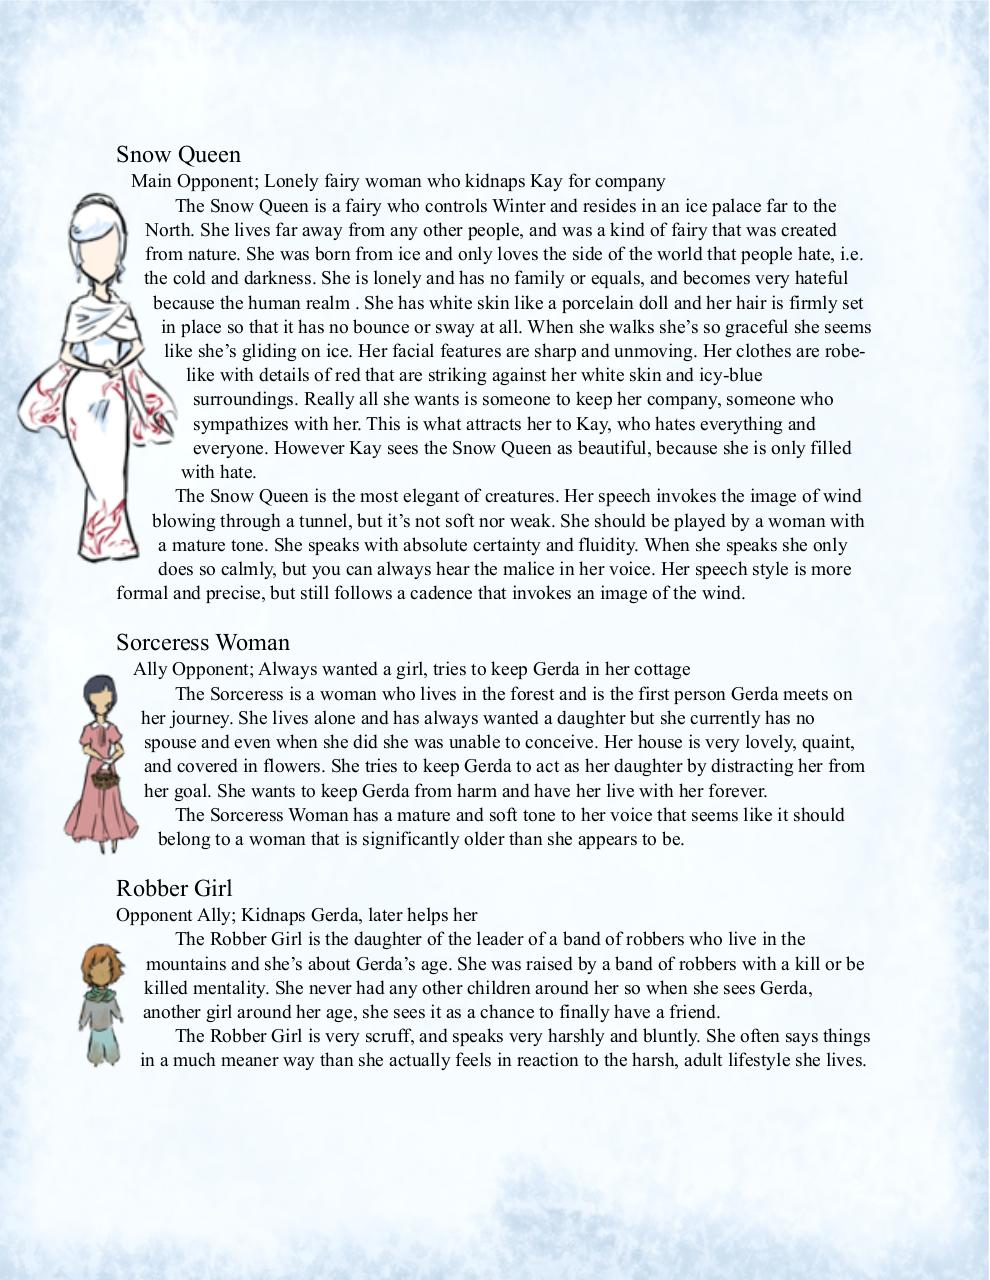 The Snow Queen.pdf - page 4/9